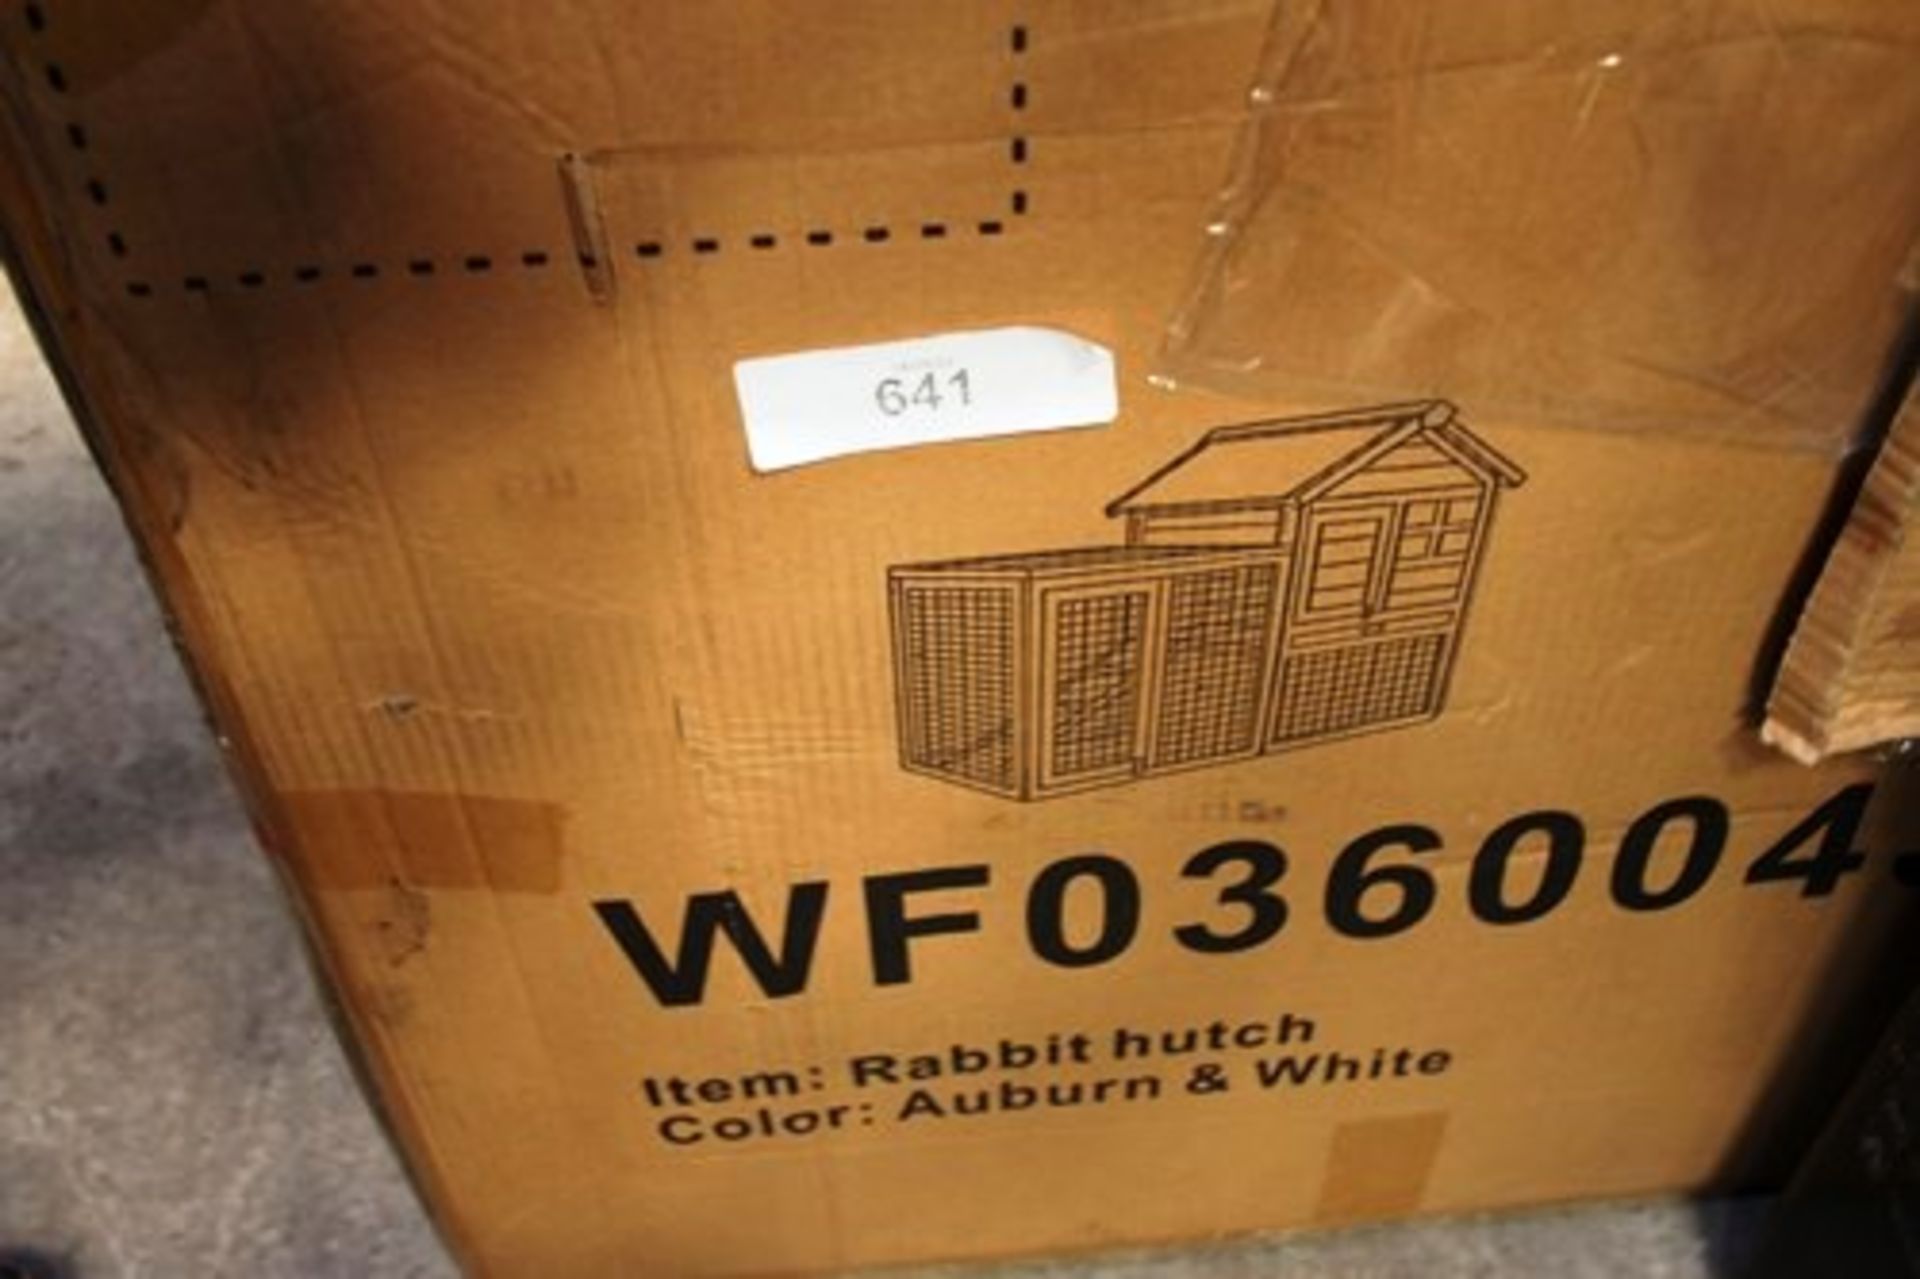 1 x unbranded auburn and white rabbit hutch, code WF03600 4JAA - New in box (Gs16)